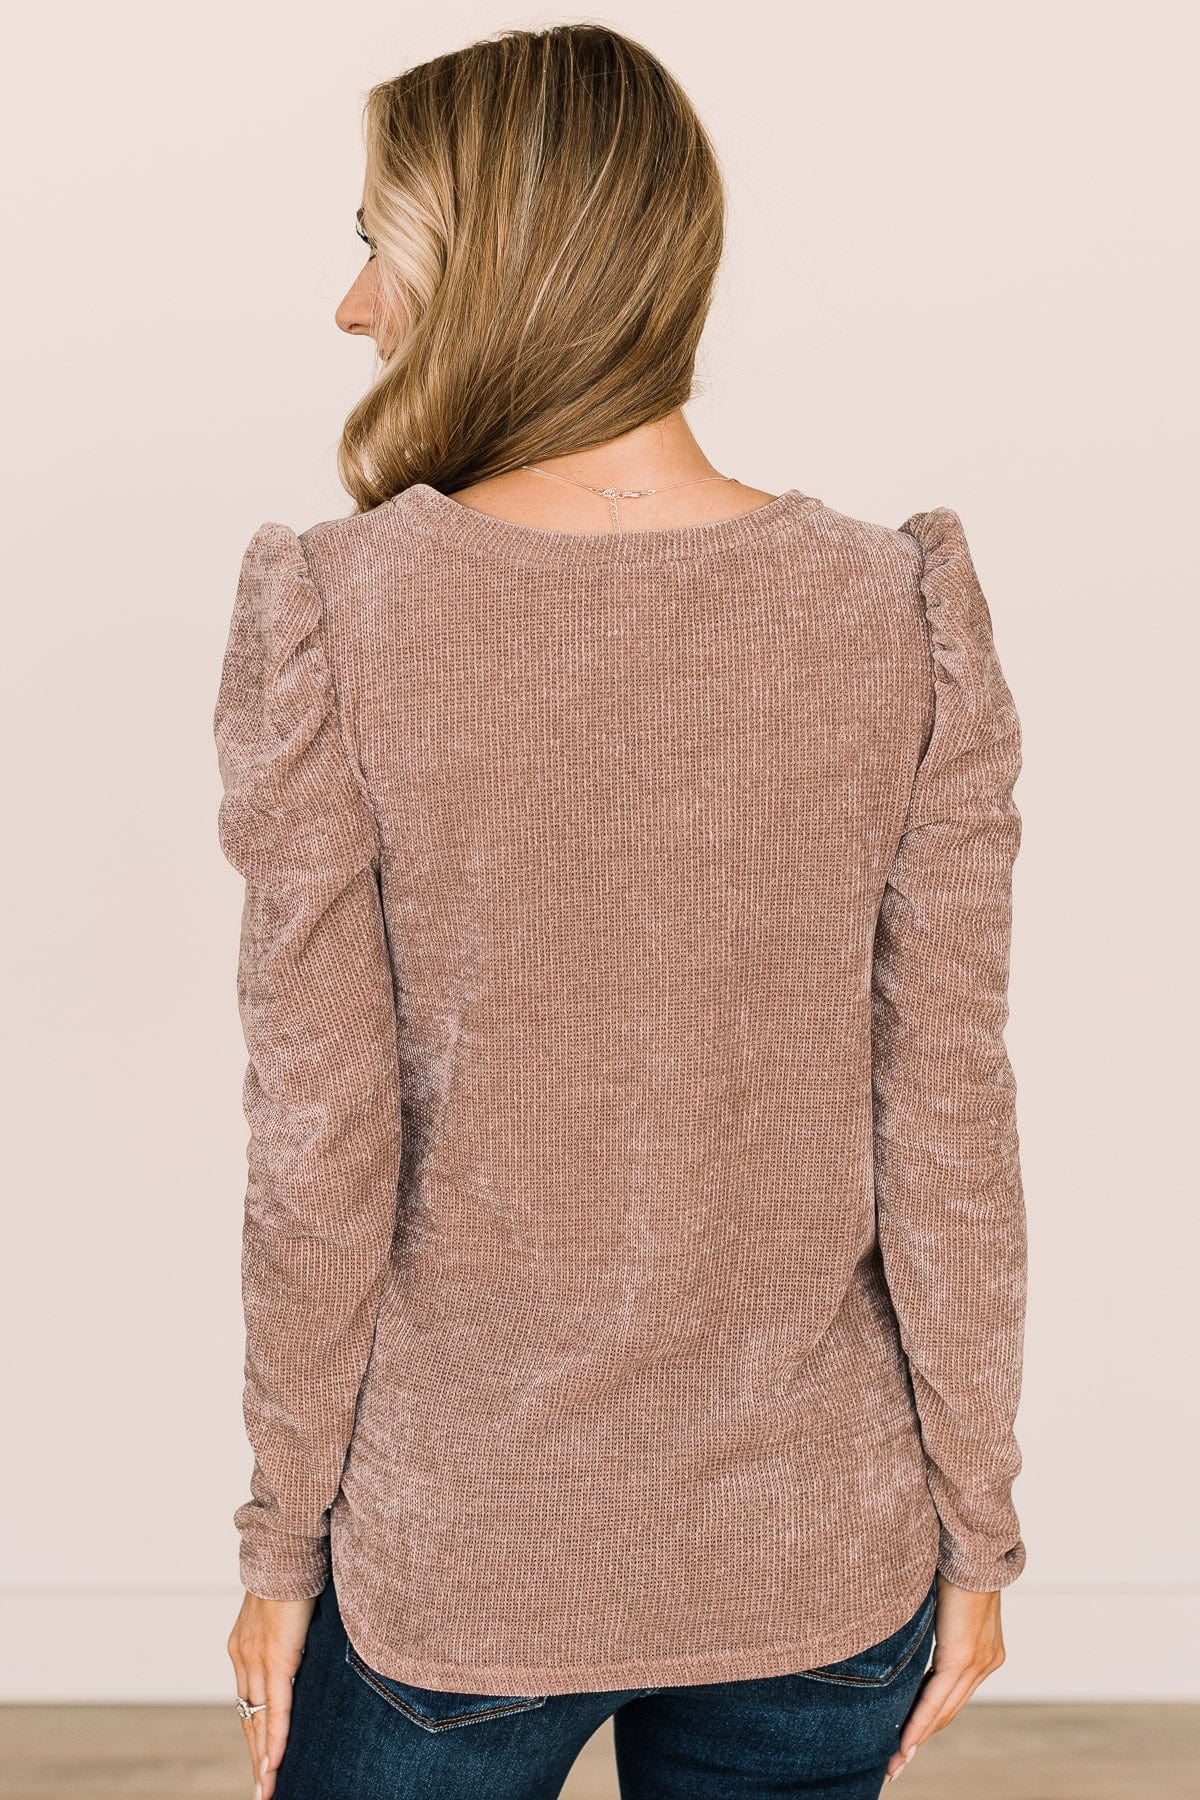 Authentic Style Puff Sleeve Top- Taupe